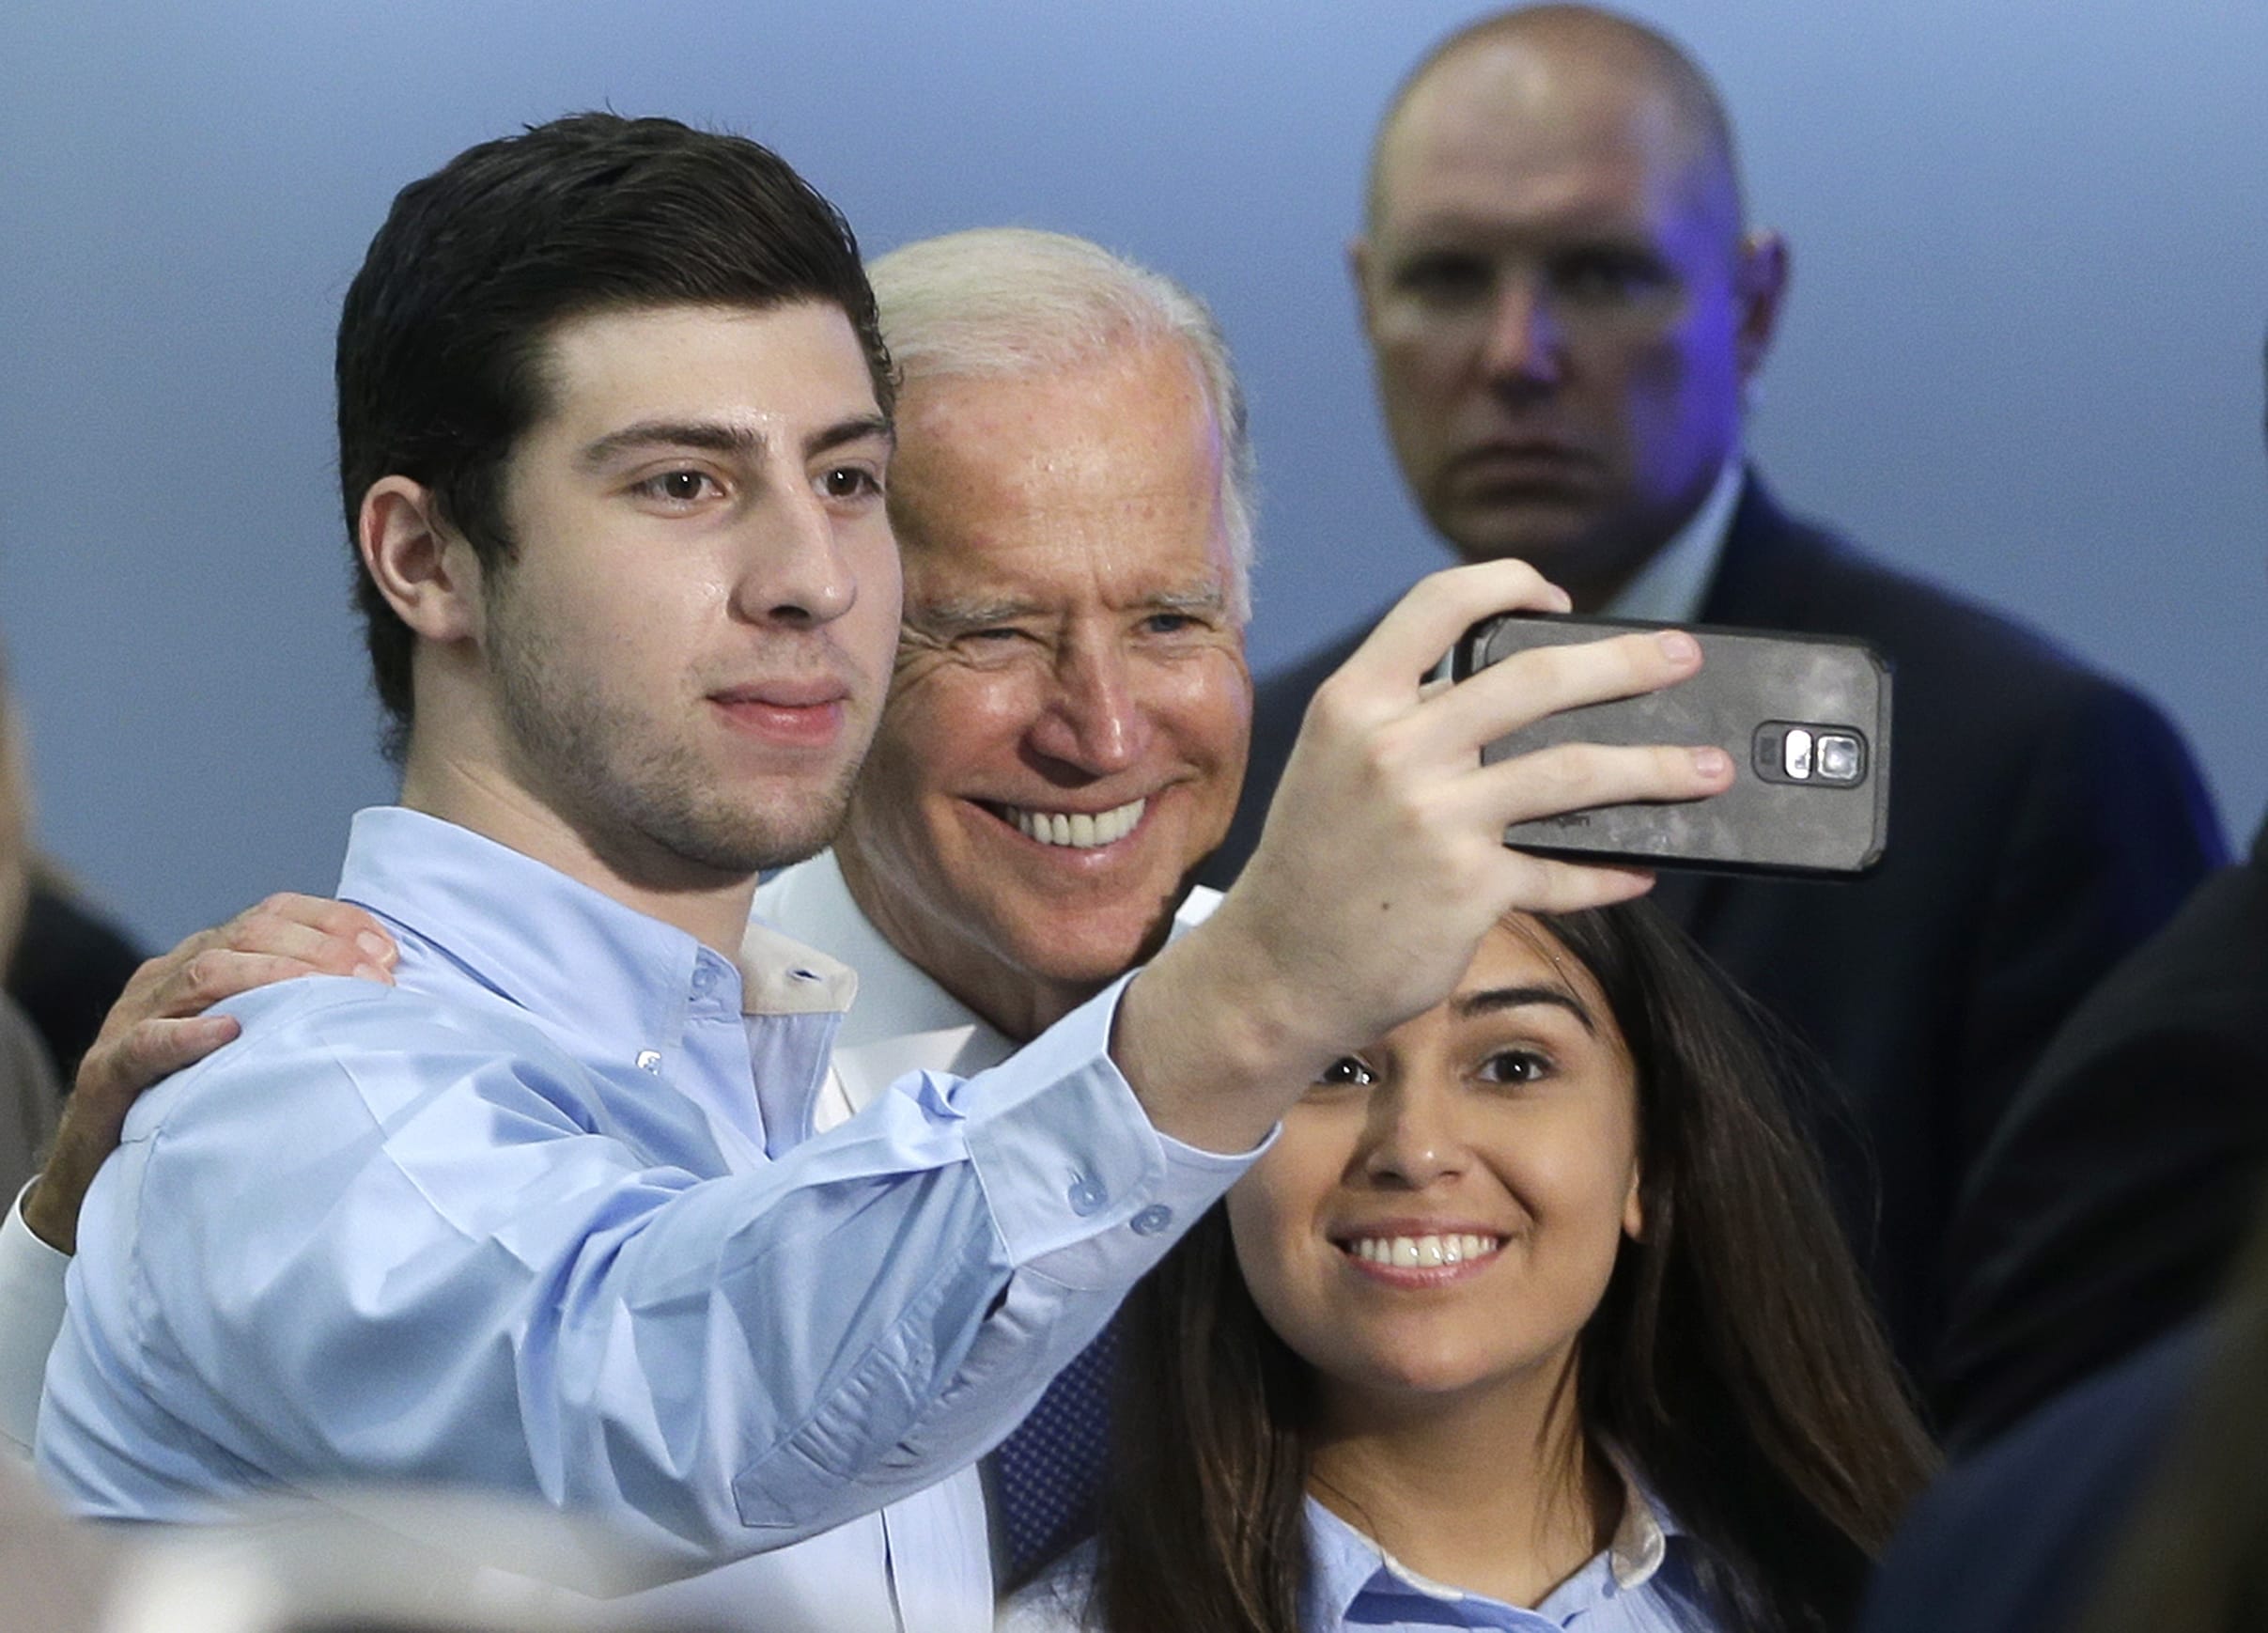 Vice President Joe Biden poses for a selfie with supporters Wednesday, Sept. 2, 2015, at Miami Dade College in Miami. Vice President Biden traveled to Florida to support Senate Democrats and the administration's education agenda.